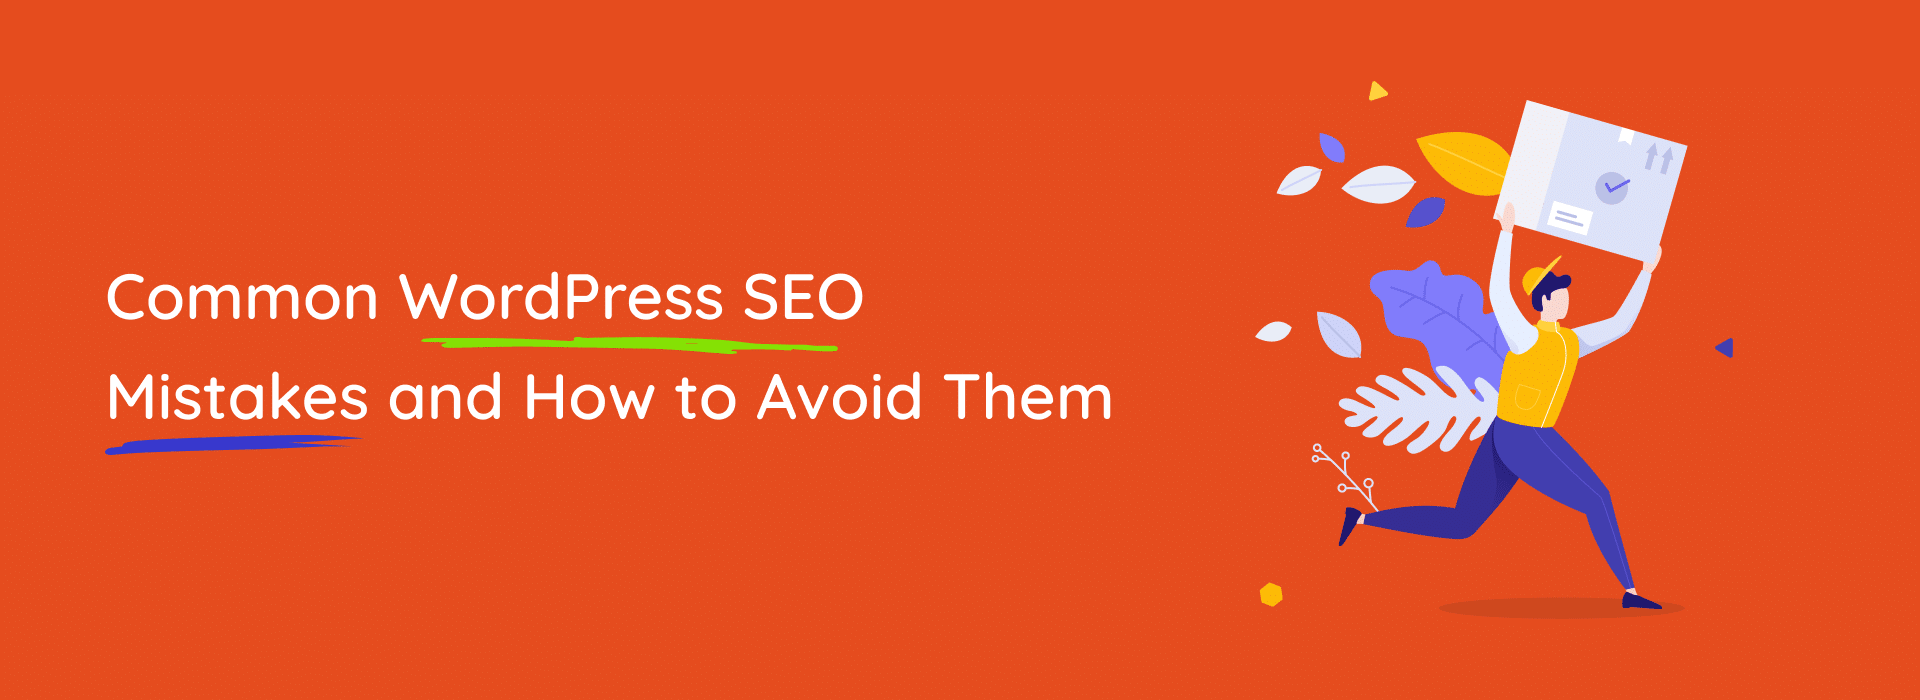 Common-WordPress-SEO-Mistakes-and-How-to-Avoid-Them